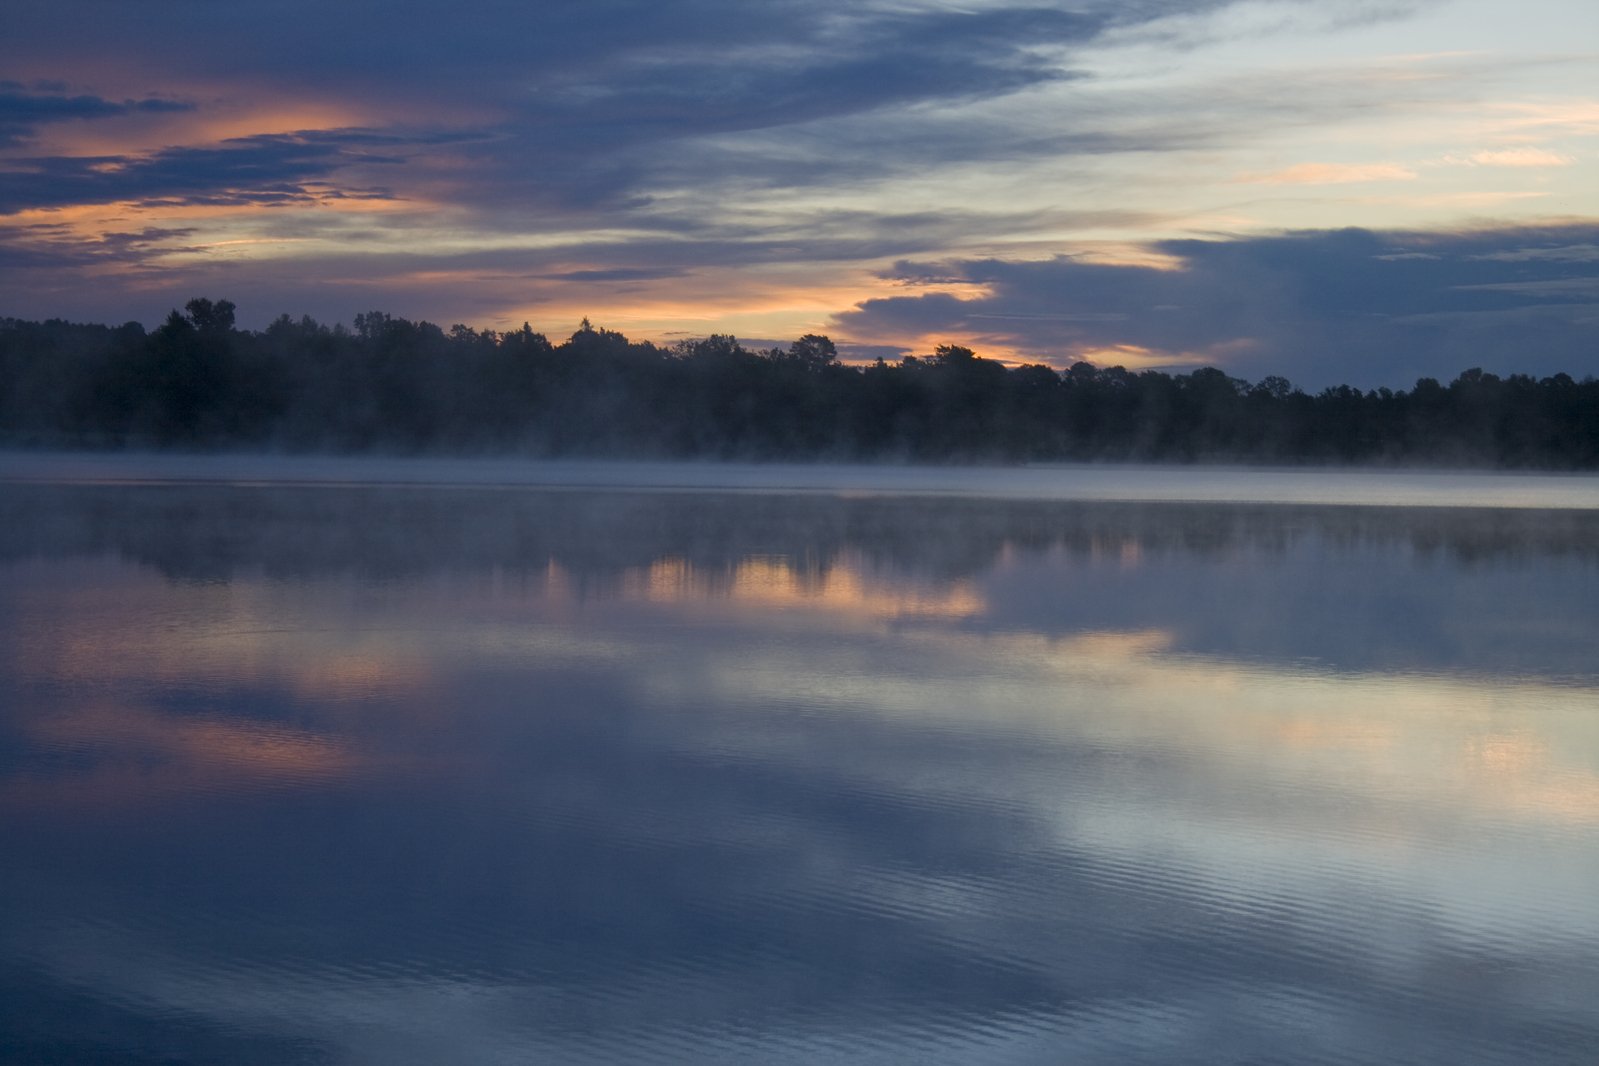 a foggy sunset shines over the calm water of a lake